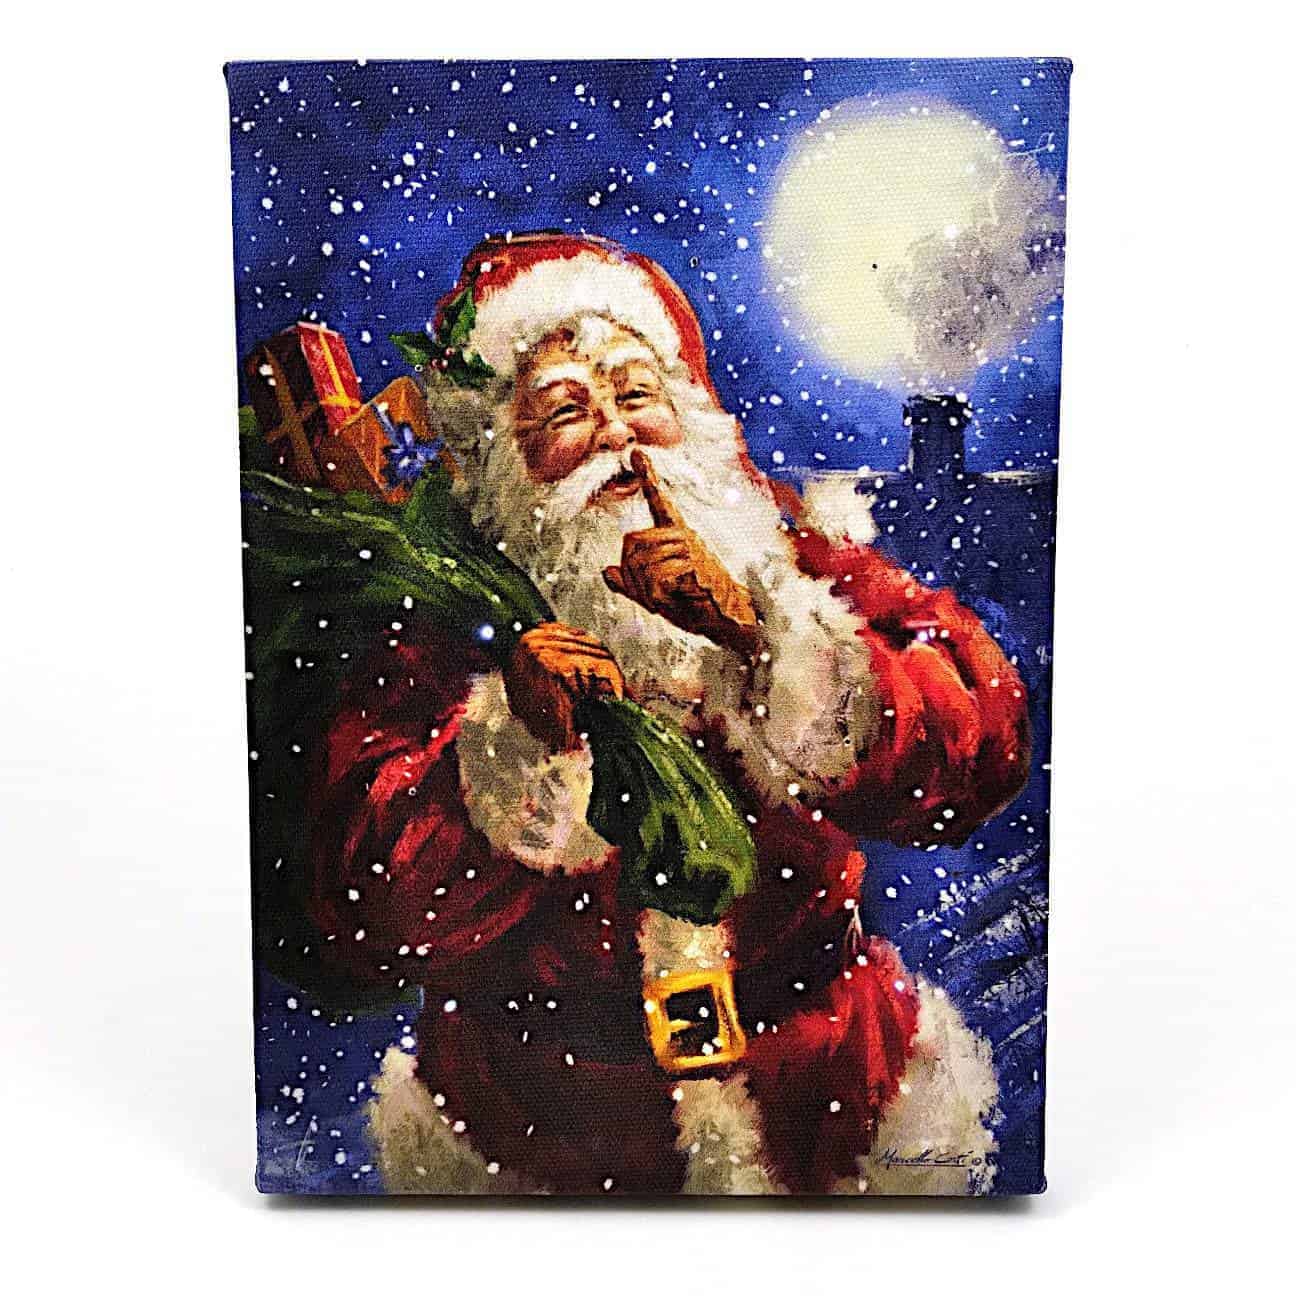 This LED Lit Tabletop Picture Art of Santa Claus Winter Scene Kris Kringle with Pack is made with love by Premier Homegoods! Shop more unique gift ideas today with Spots Initiatives, the best way to support creators.